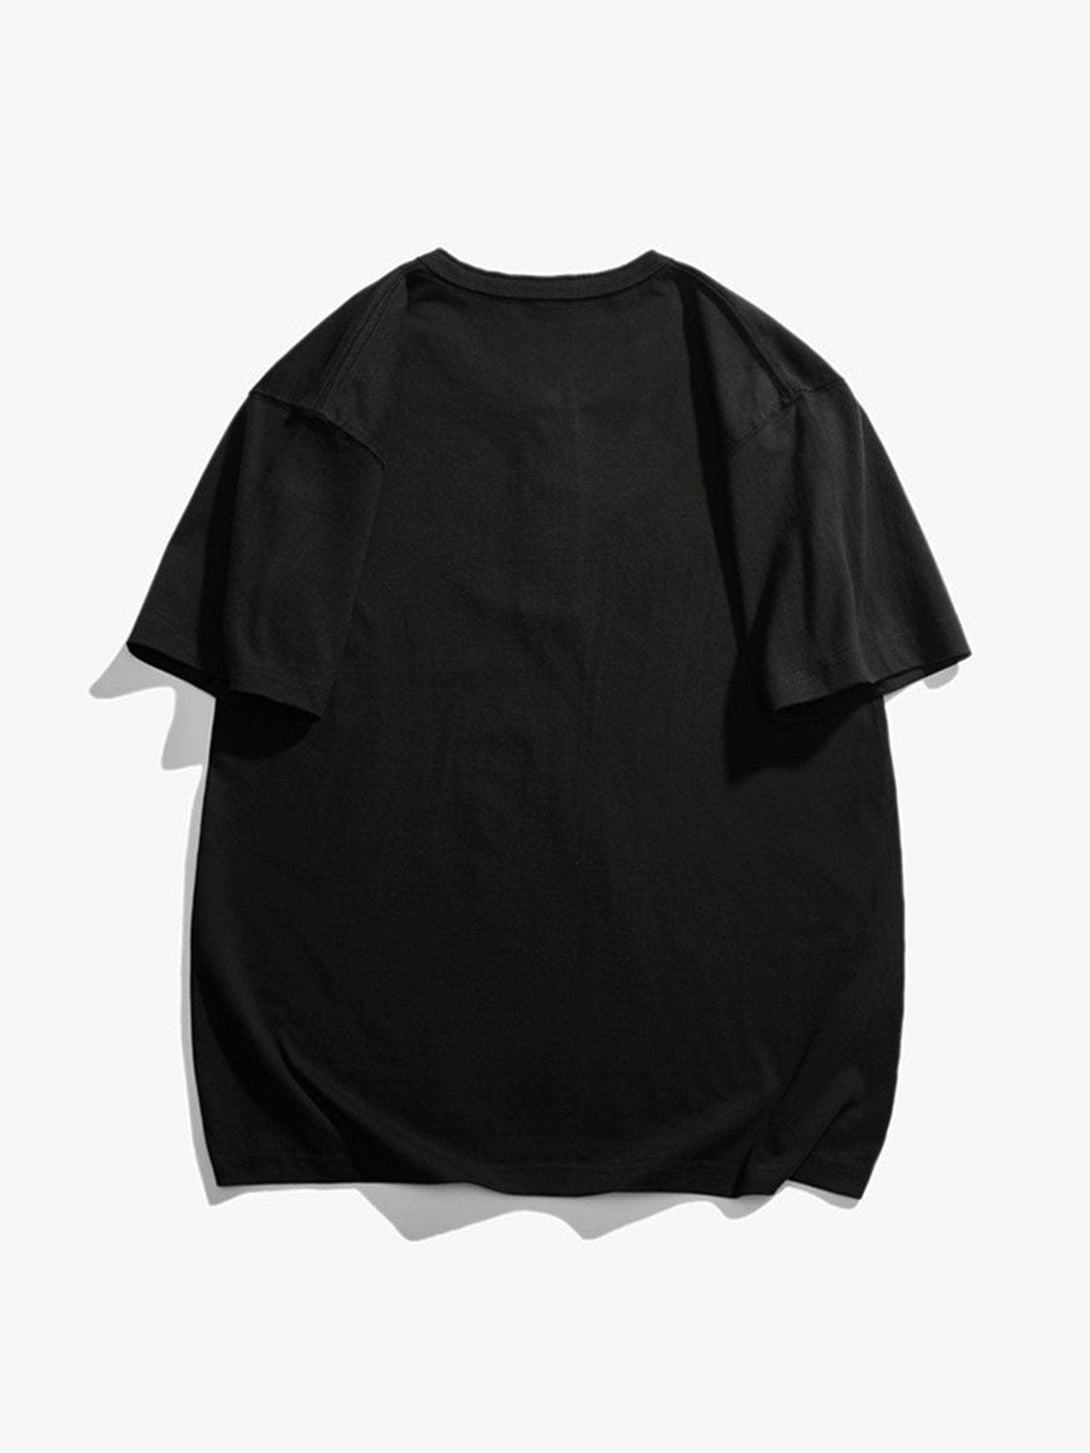 Ellesey - Solid Buttons Cotton Tee- Streetwear Fashion - ellesey.com